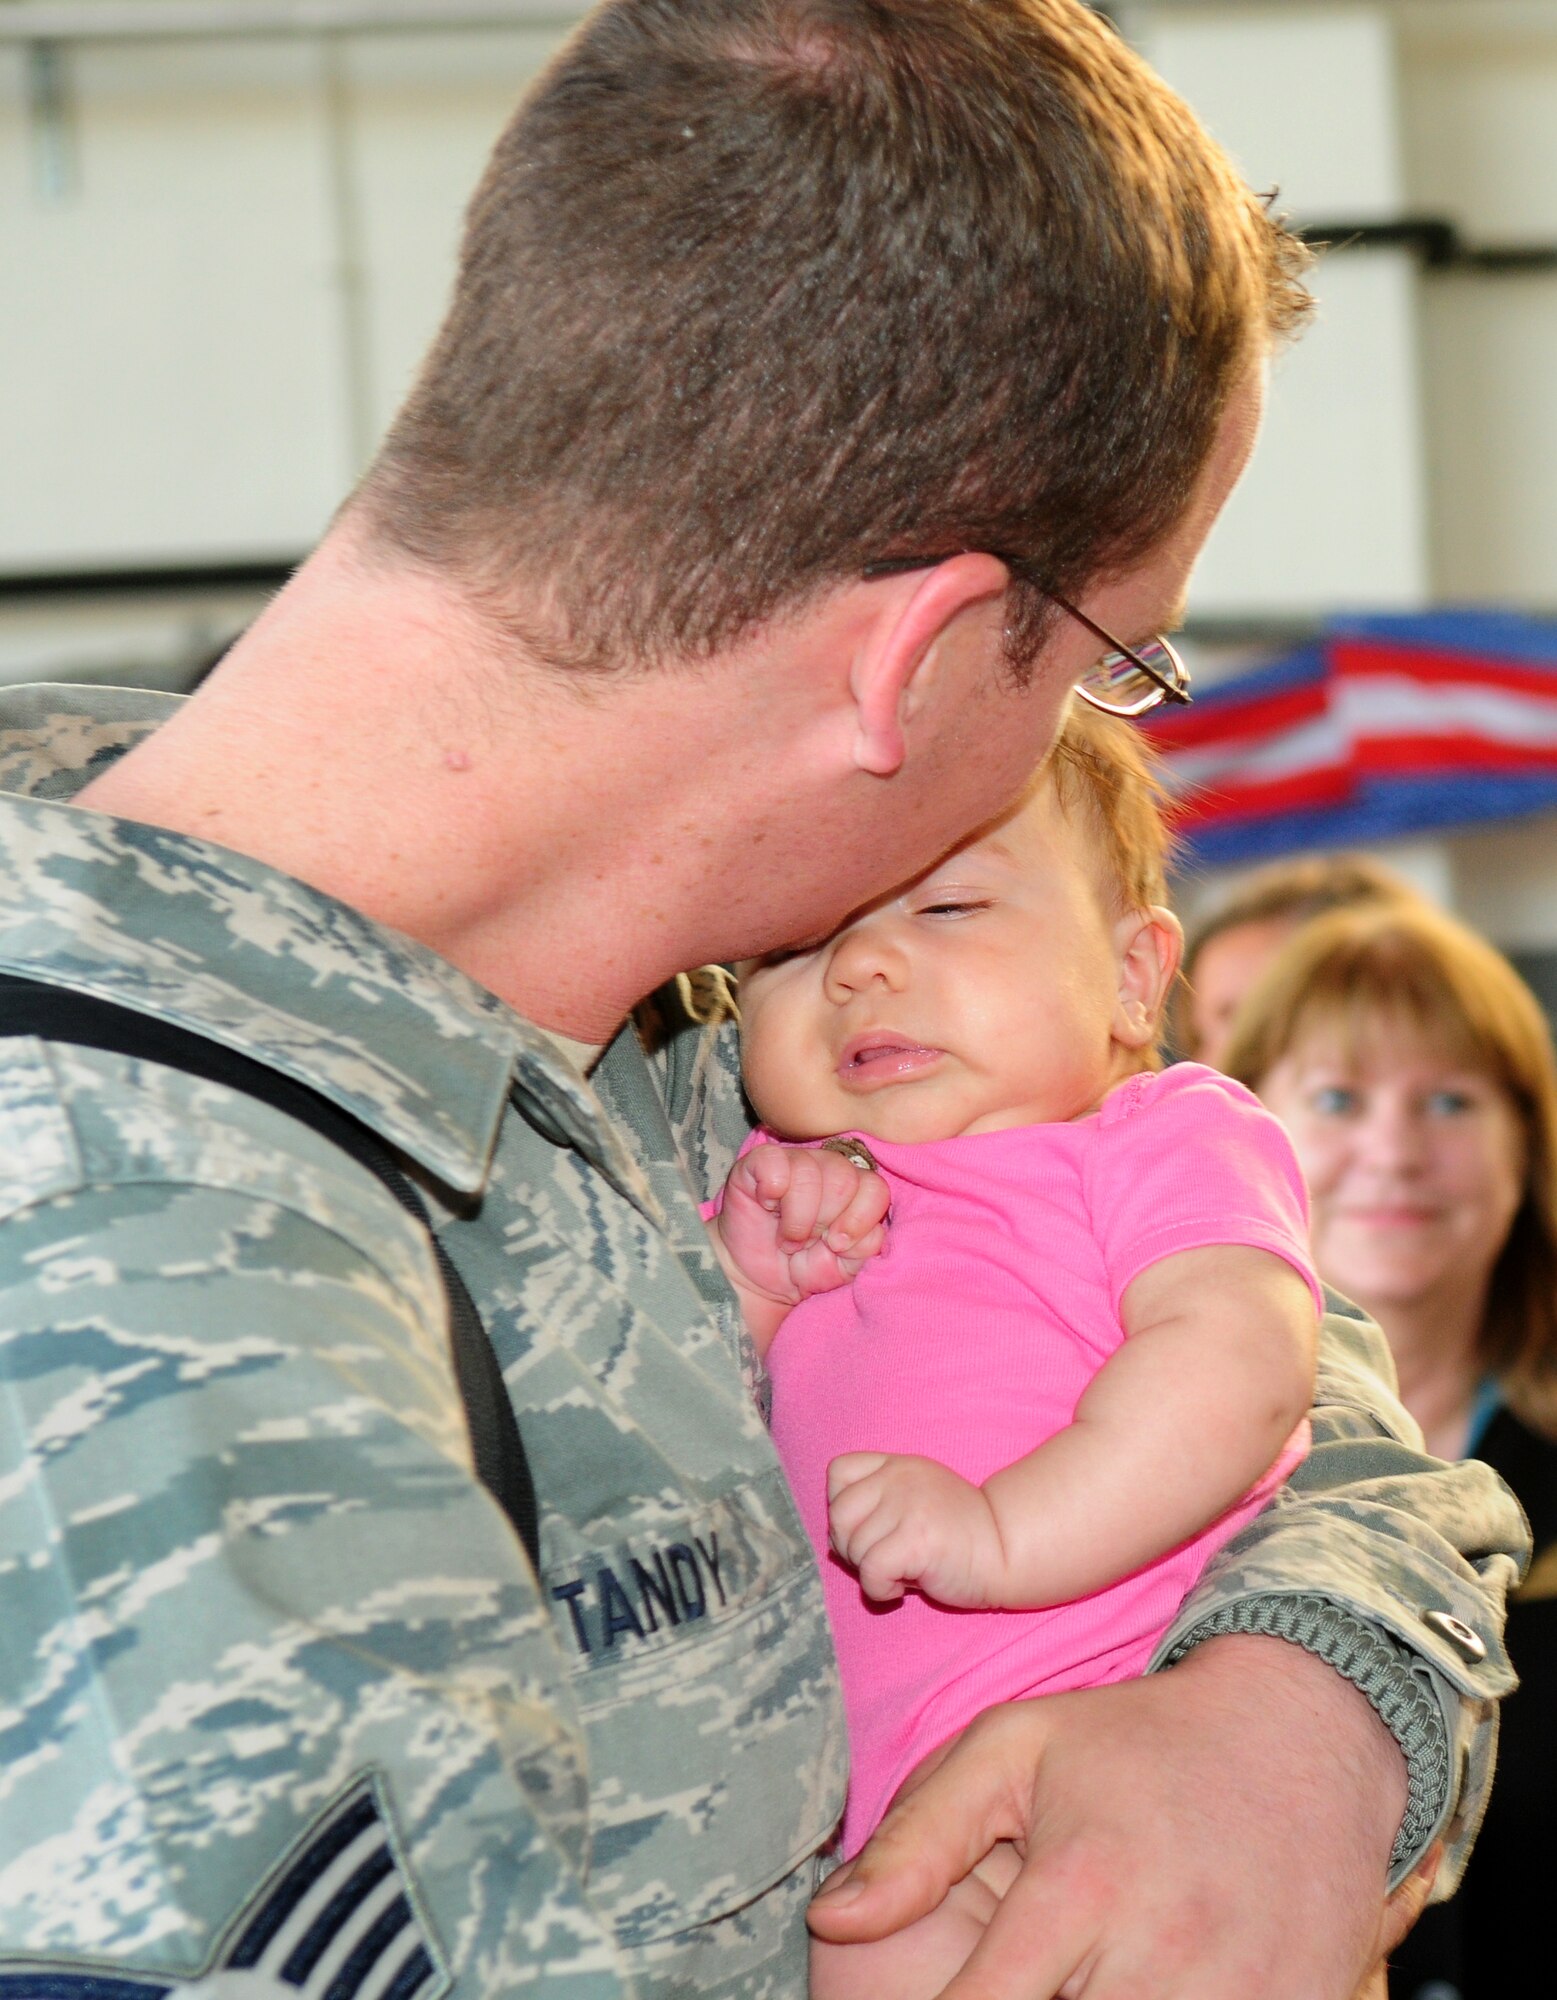 SPANGDAHLEM AIR BASE, Germany – Staff Sgt. Wesley Tandy, 52nd Aircraft Maintenance Squadron, kisses his newborn daughter, Ava, who was born during his deployment to Afghanistan.  Sergeant Tandy was deployed in support of the 81st Fighter Squadron. (U.S. Air Force photo/Staff Sgt. Heather M. Norris)